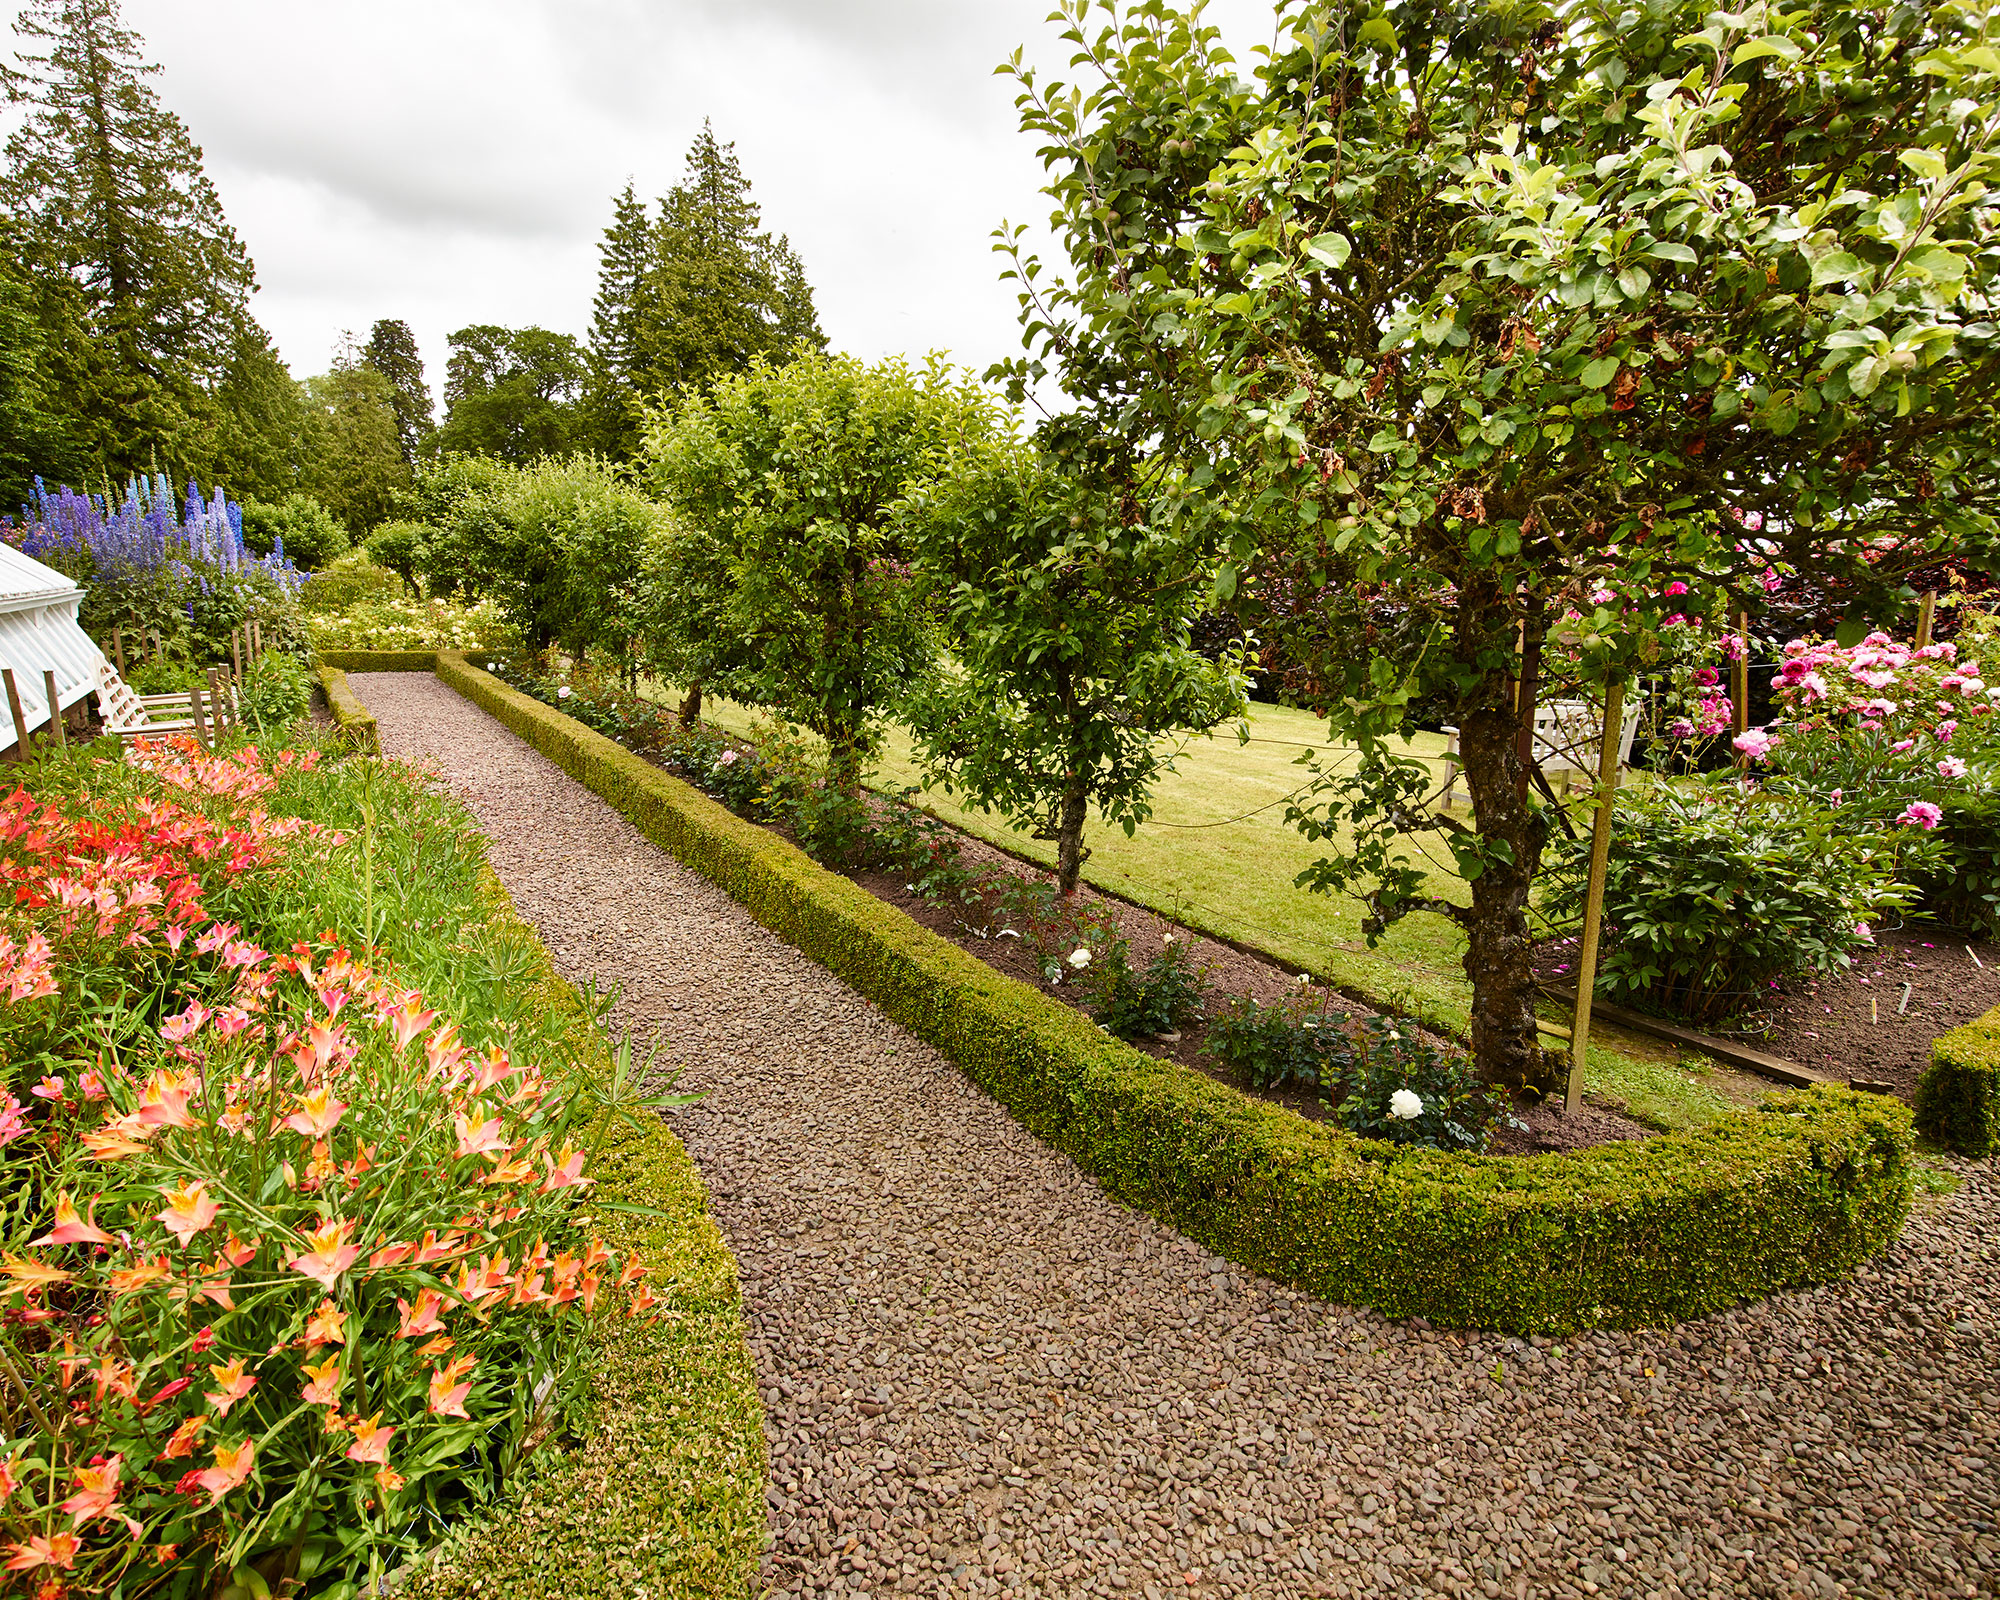 Large garden with low hedging, trees, flowers, gravel path